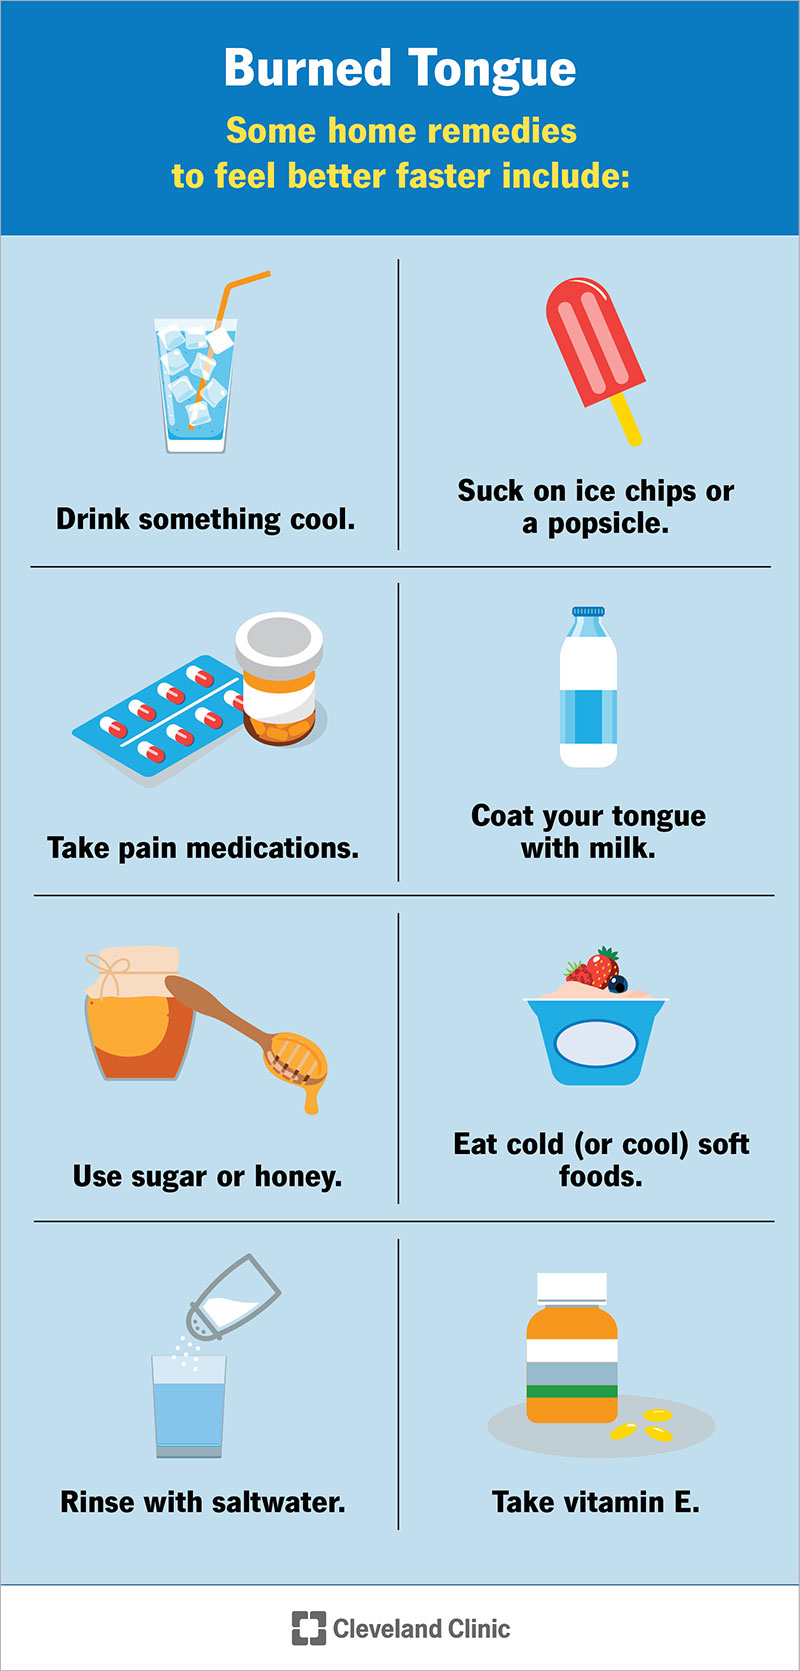 Home remedies that can relieve the pain associated with a burned tongue